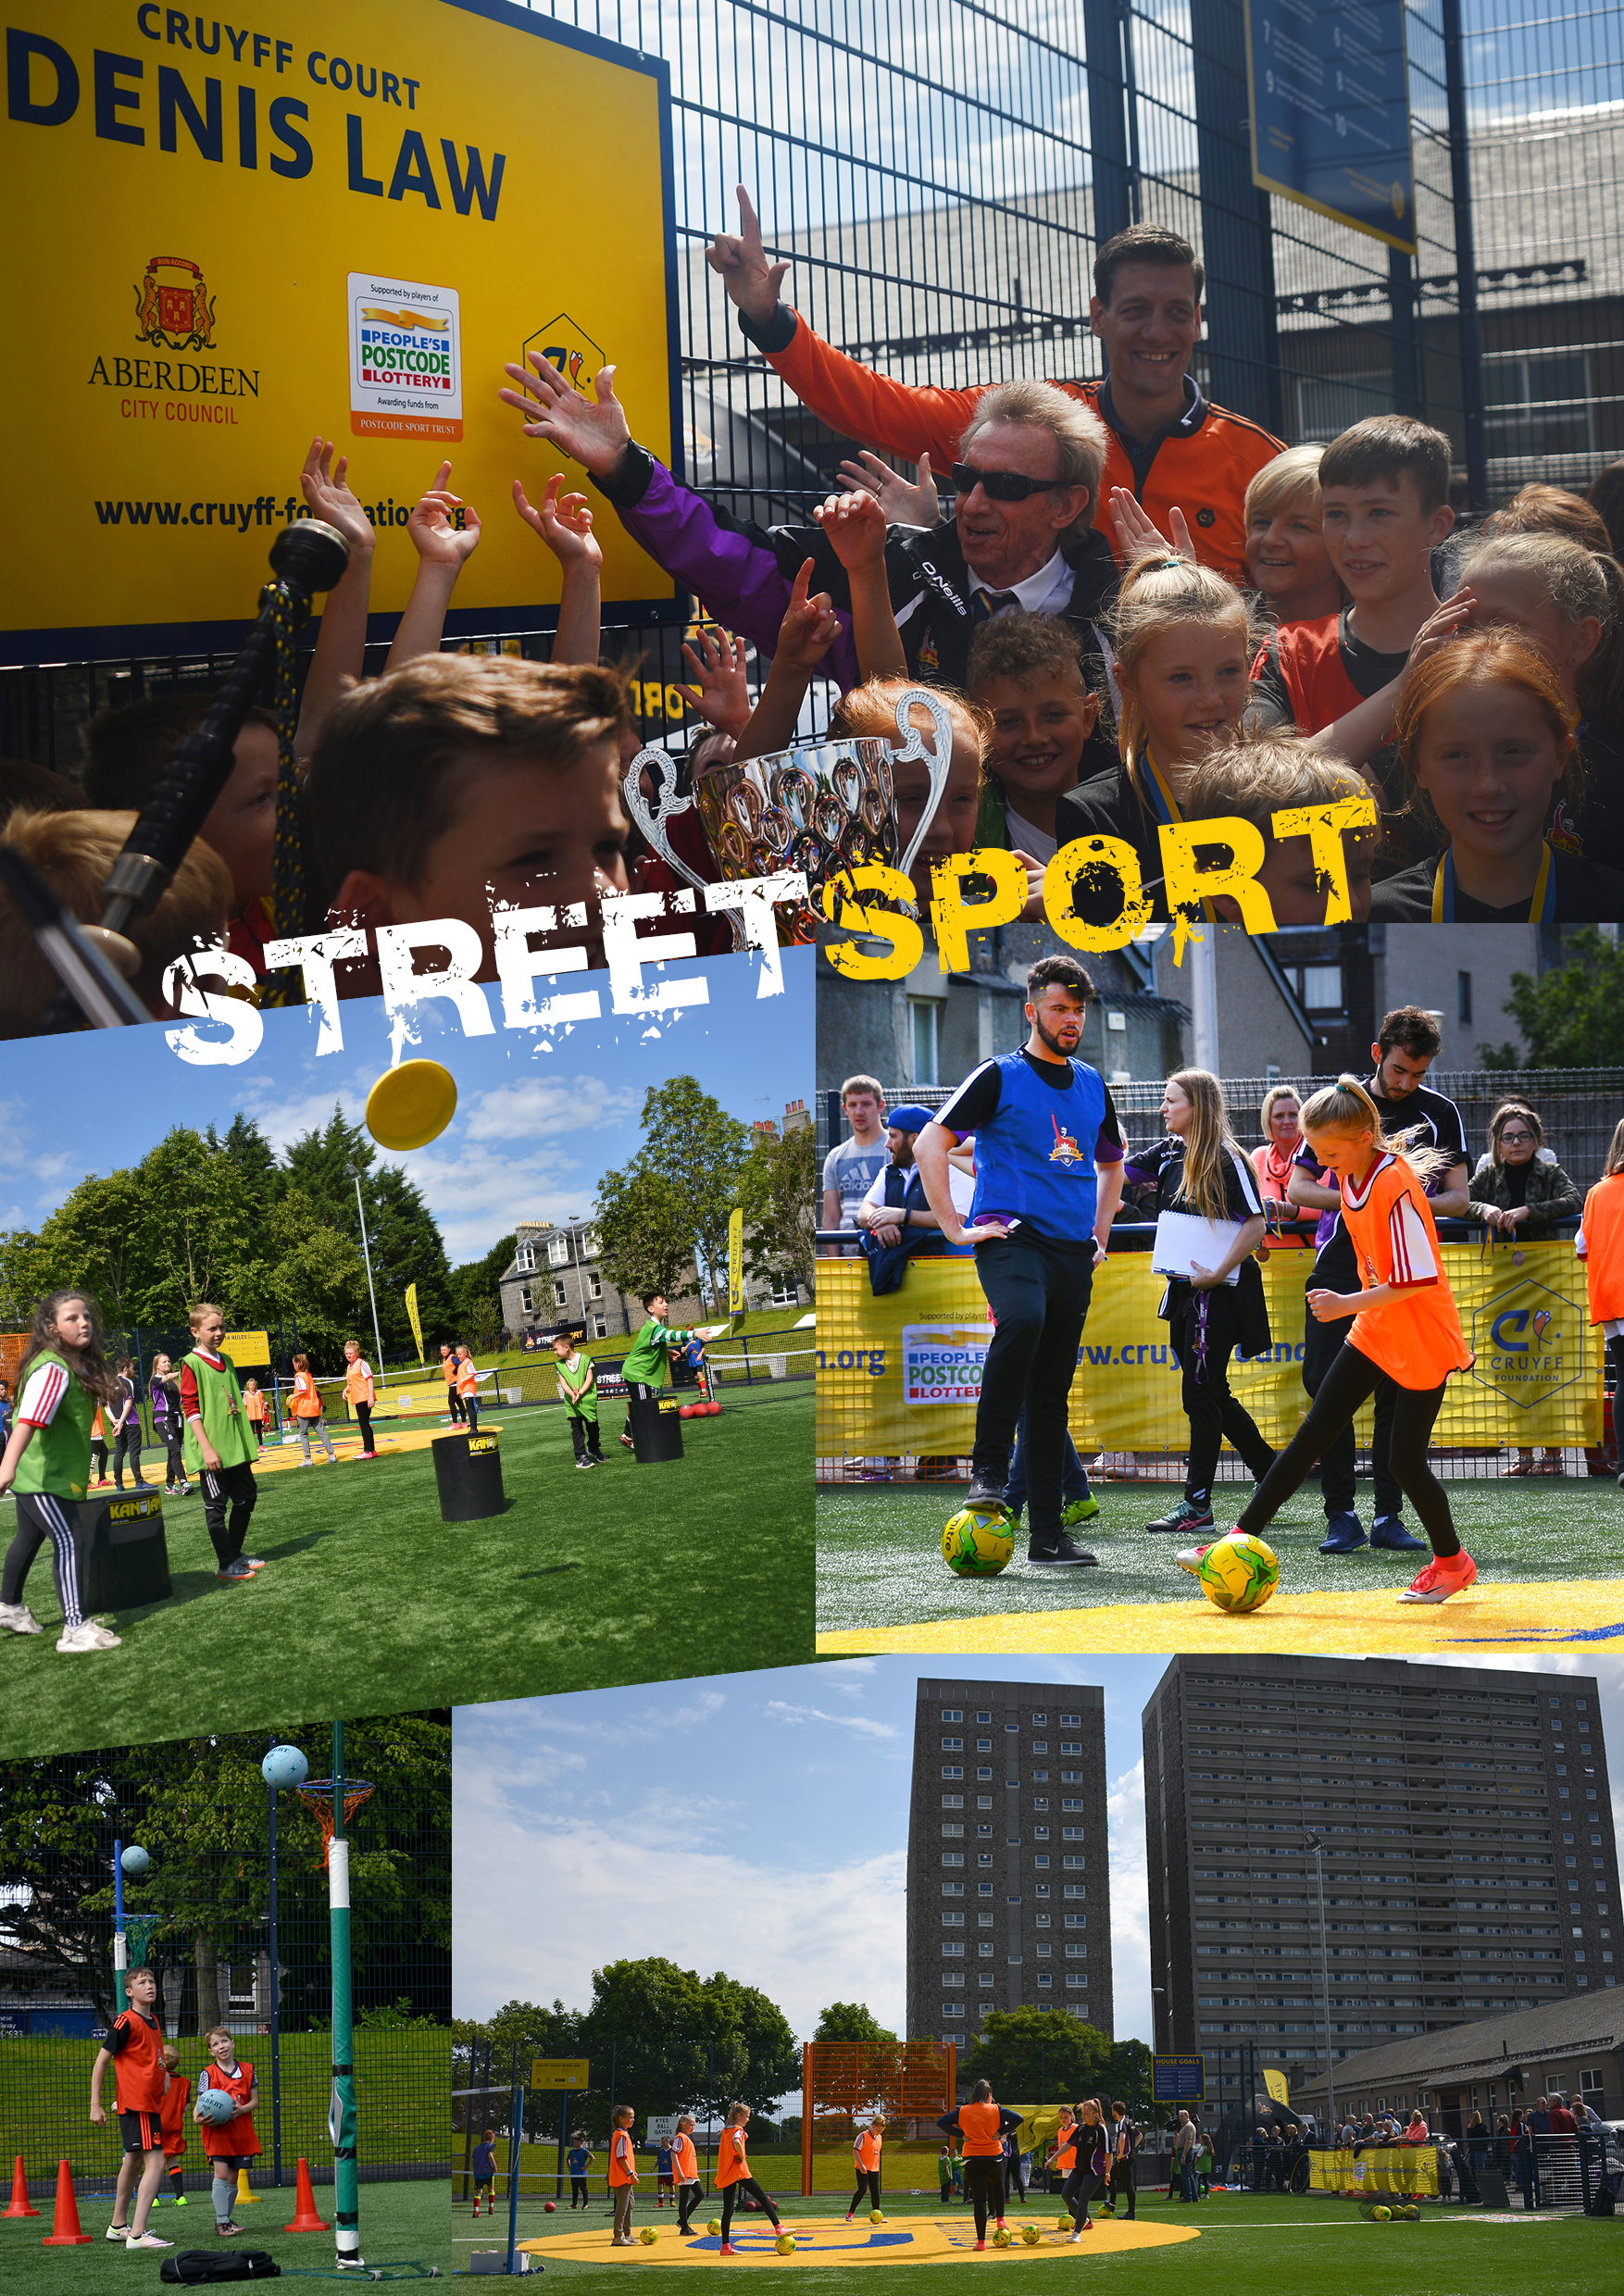 STREETSPORT PROMOTIONAL POSTER- Cruyff.png